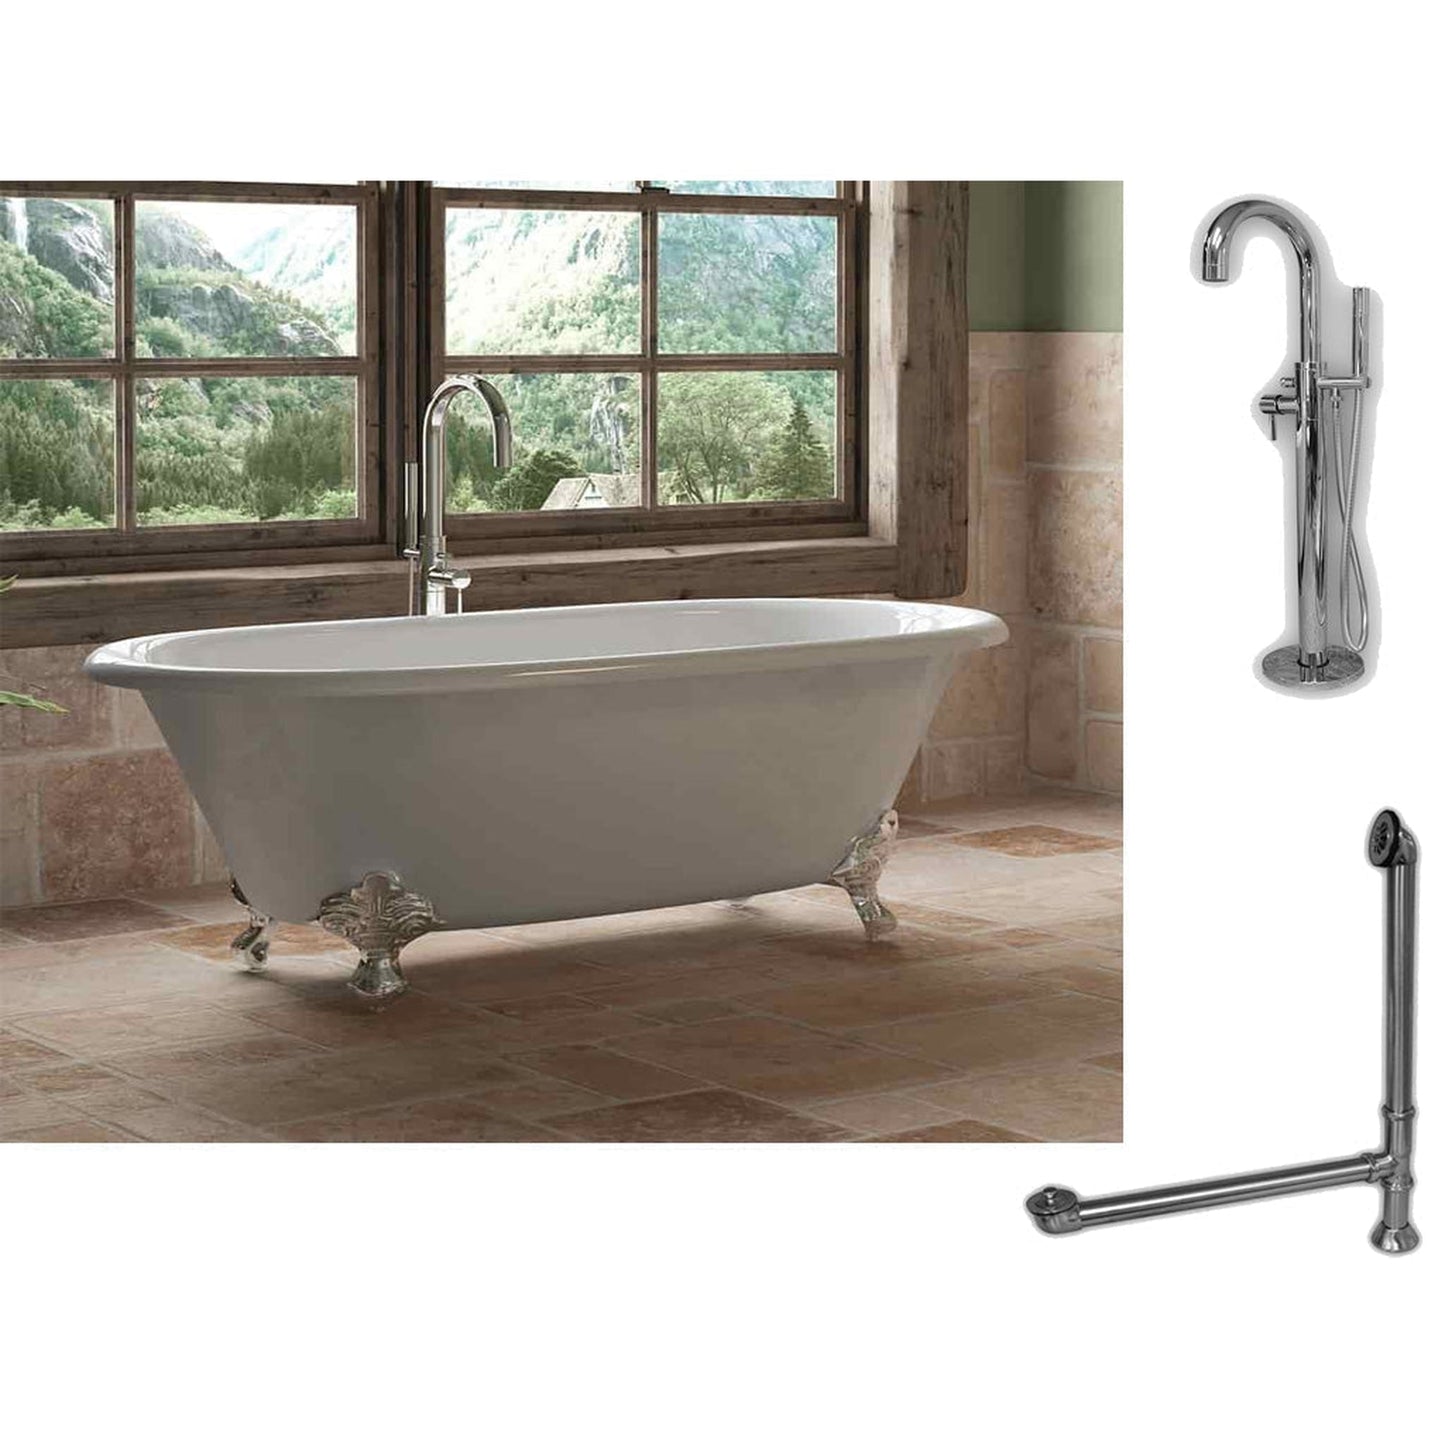 Cambridge Plumbing 60" White Cast Iron Double Ended Clawfoot Bathtub With No Deck Holes And Complete Plumbing Package Including Freestanding Floor Mounted Faucet, Drain And Overflow Assembly In Polished Chrome